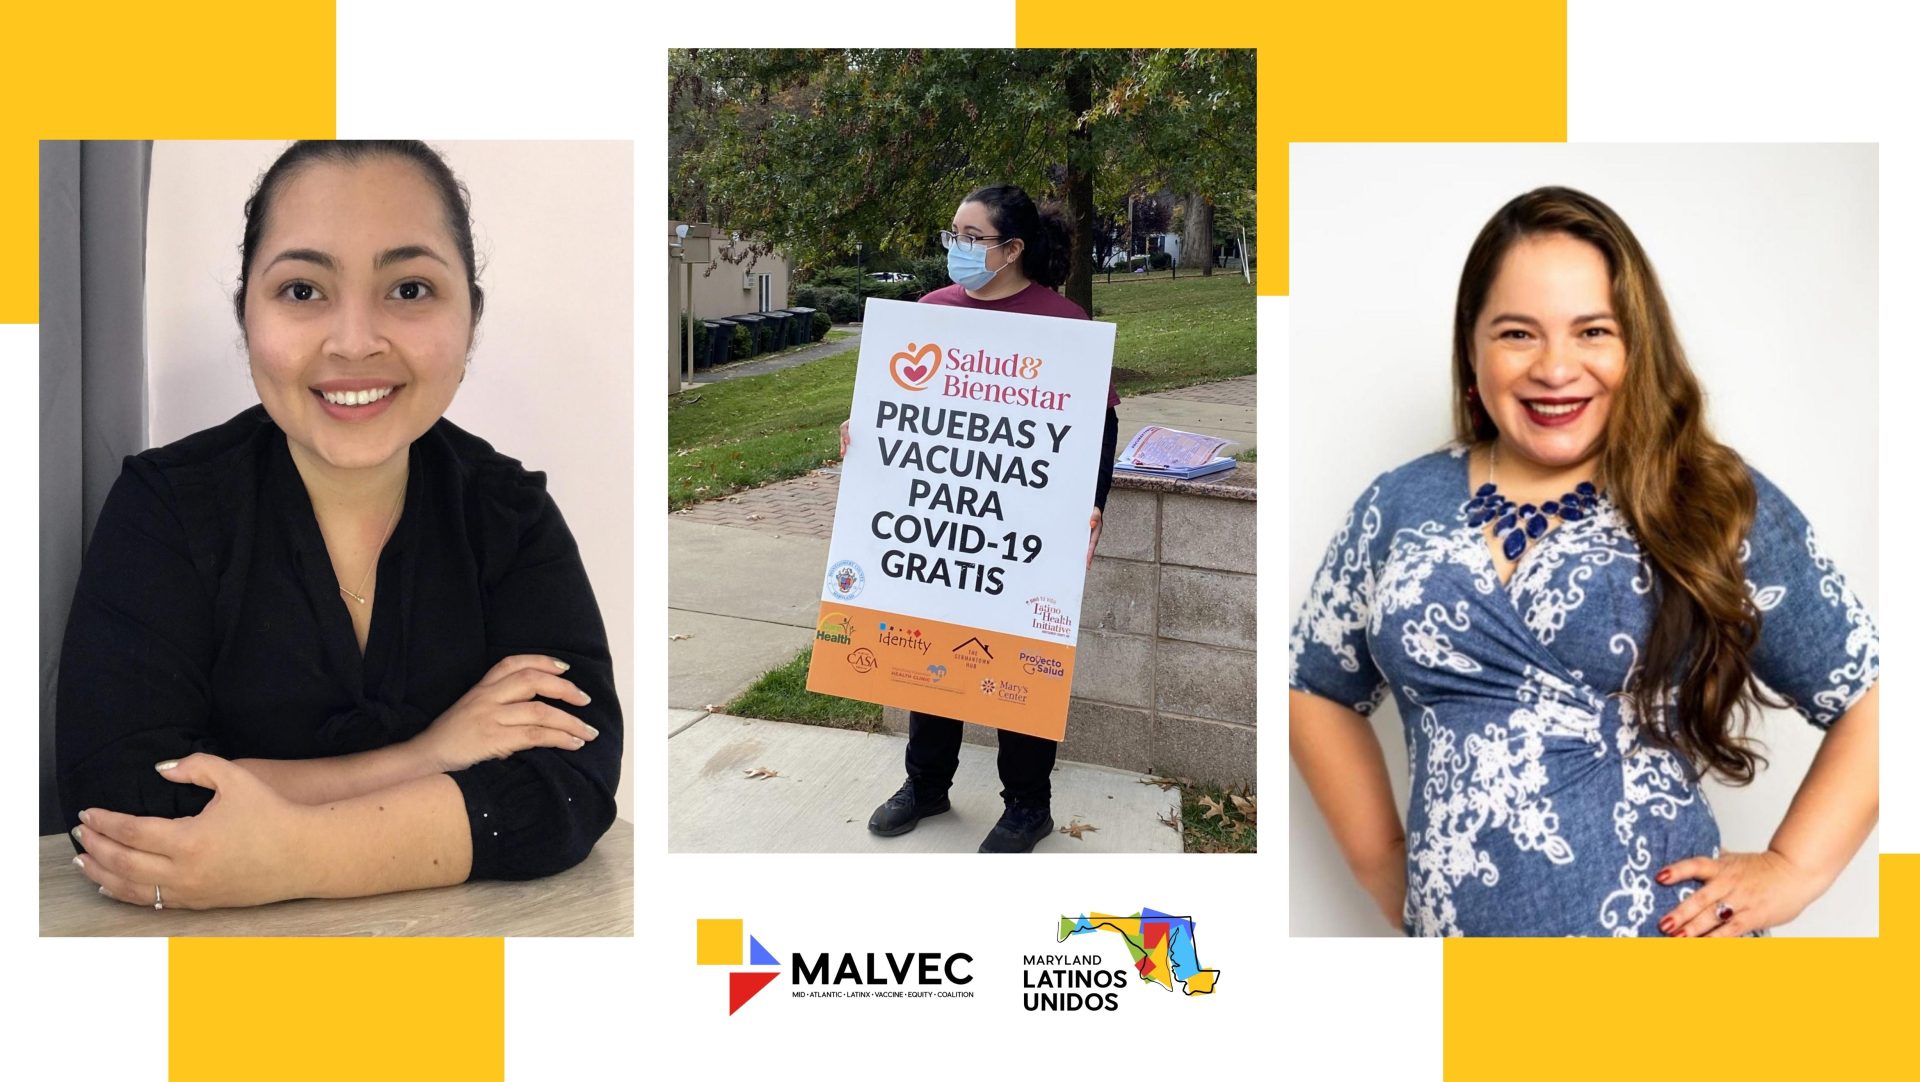 Three separate photos of Latina women who are community health workers for MALVEC and MLU